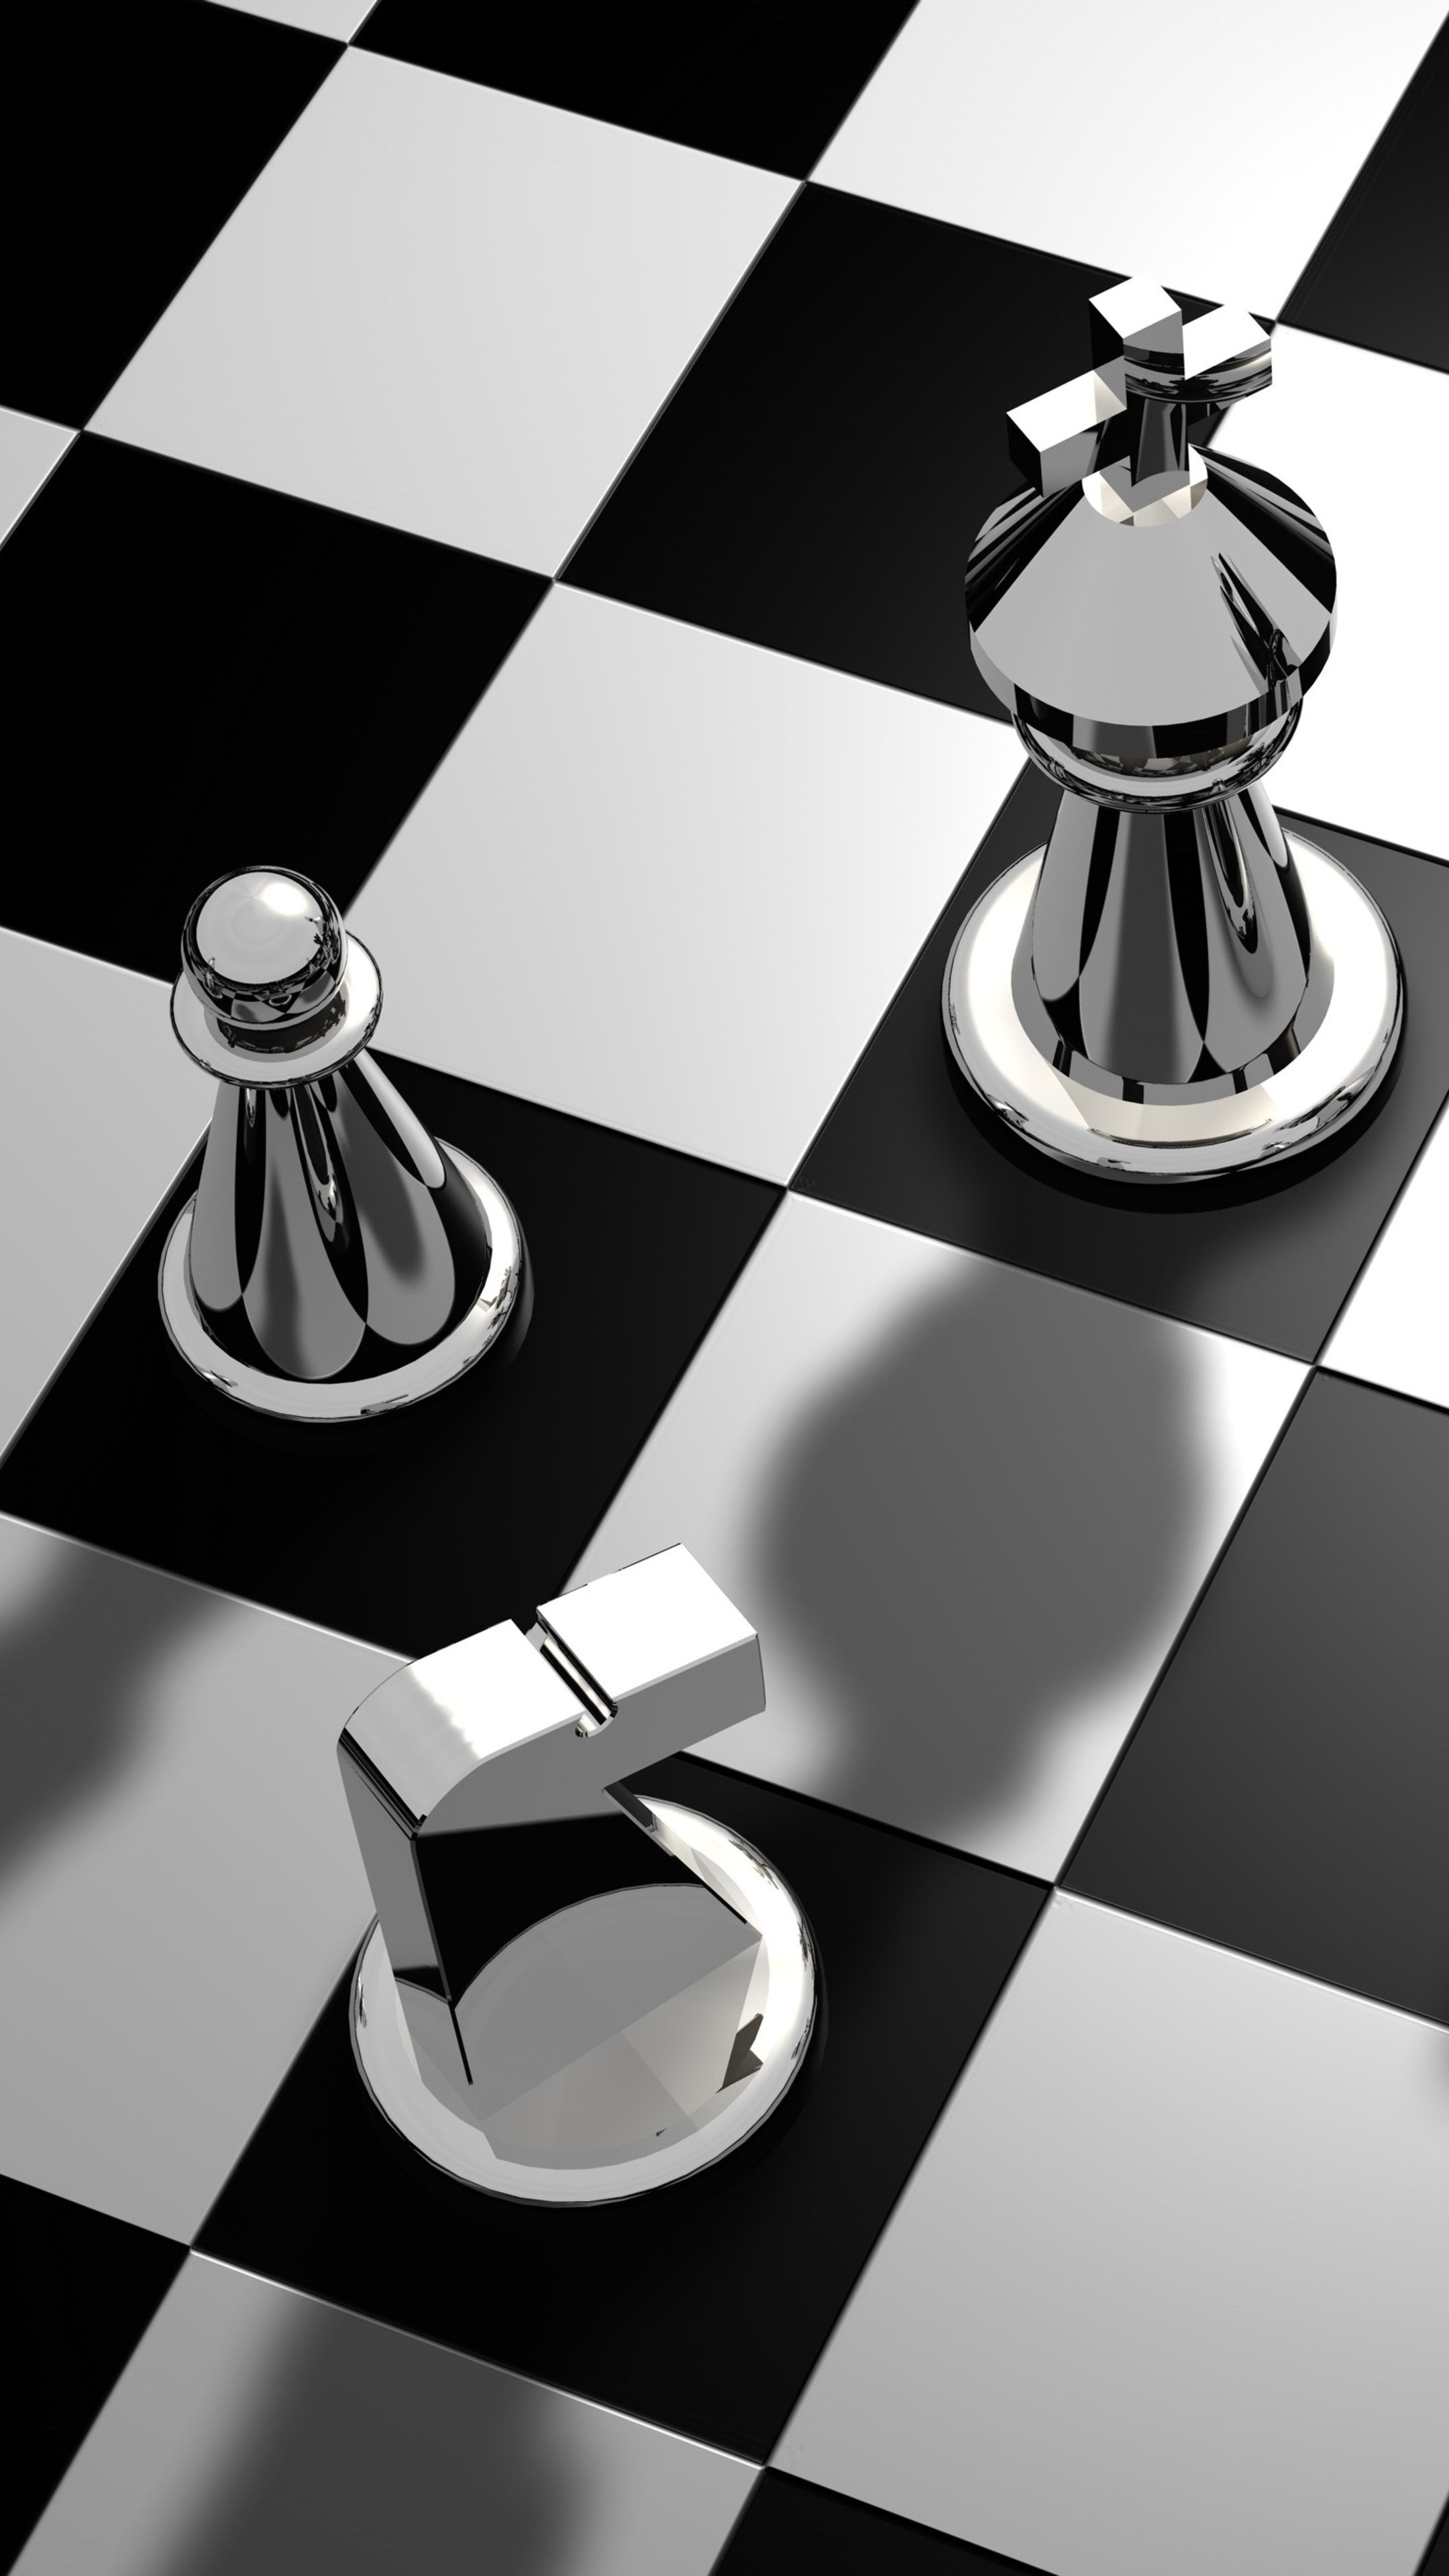 Chess pieces Sony Xperia, HD 4K wallpapers, Backgrounds, Mobile, 2160x3840 4K Phone